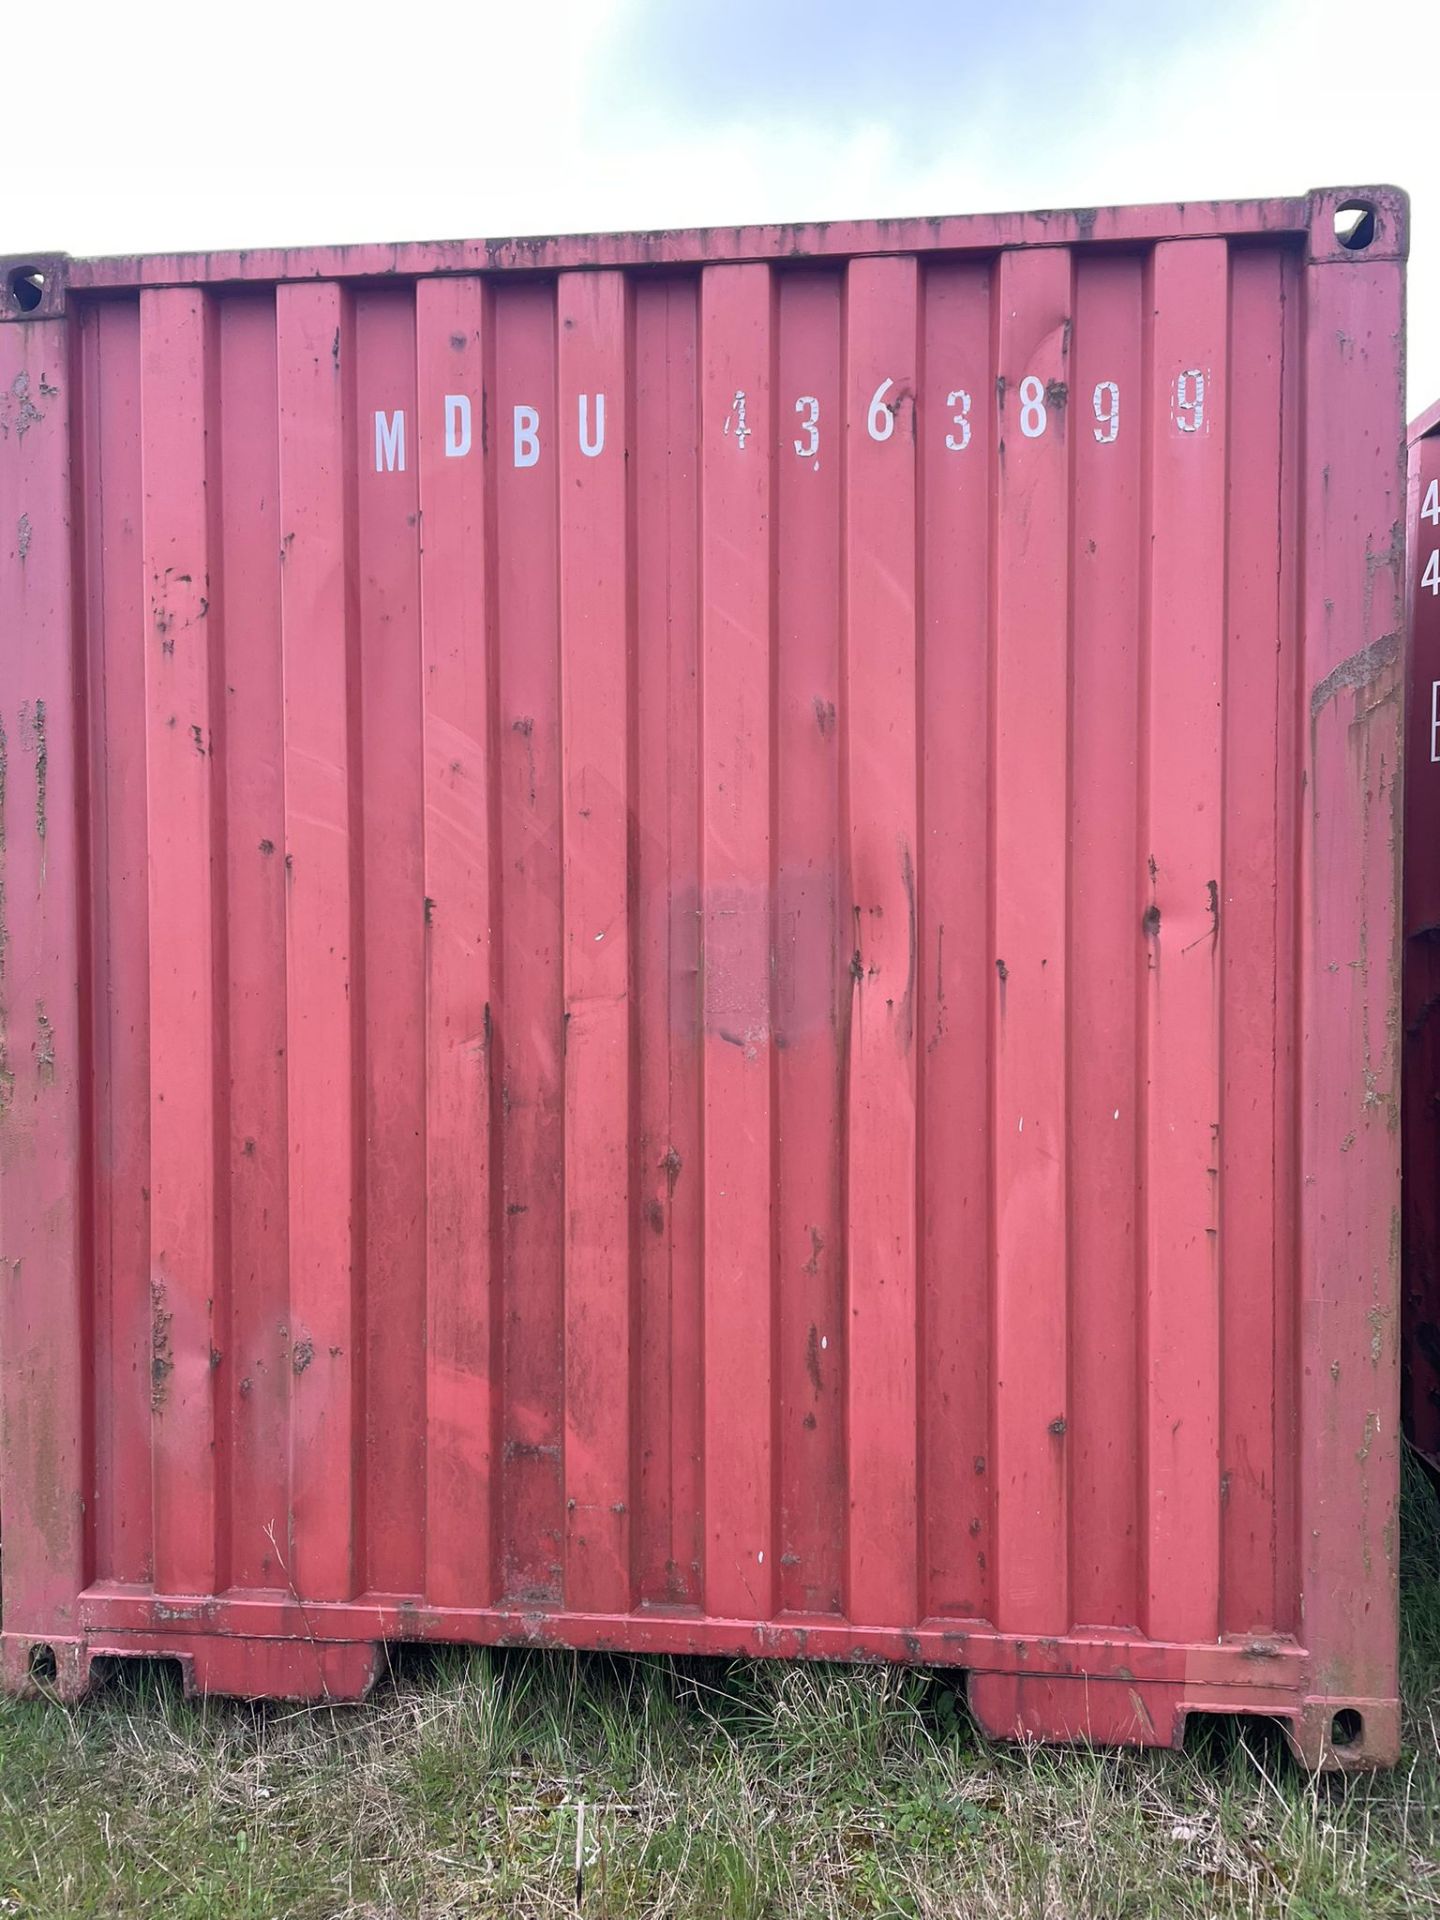 Shipping Container - ref MDBU4363899 - NO RESERVE (40’ GP - Standard) - Image 4 of 4